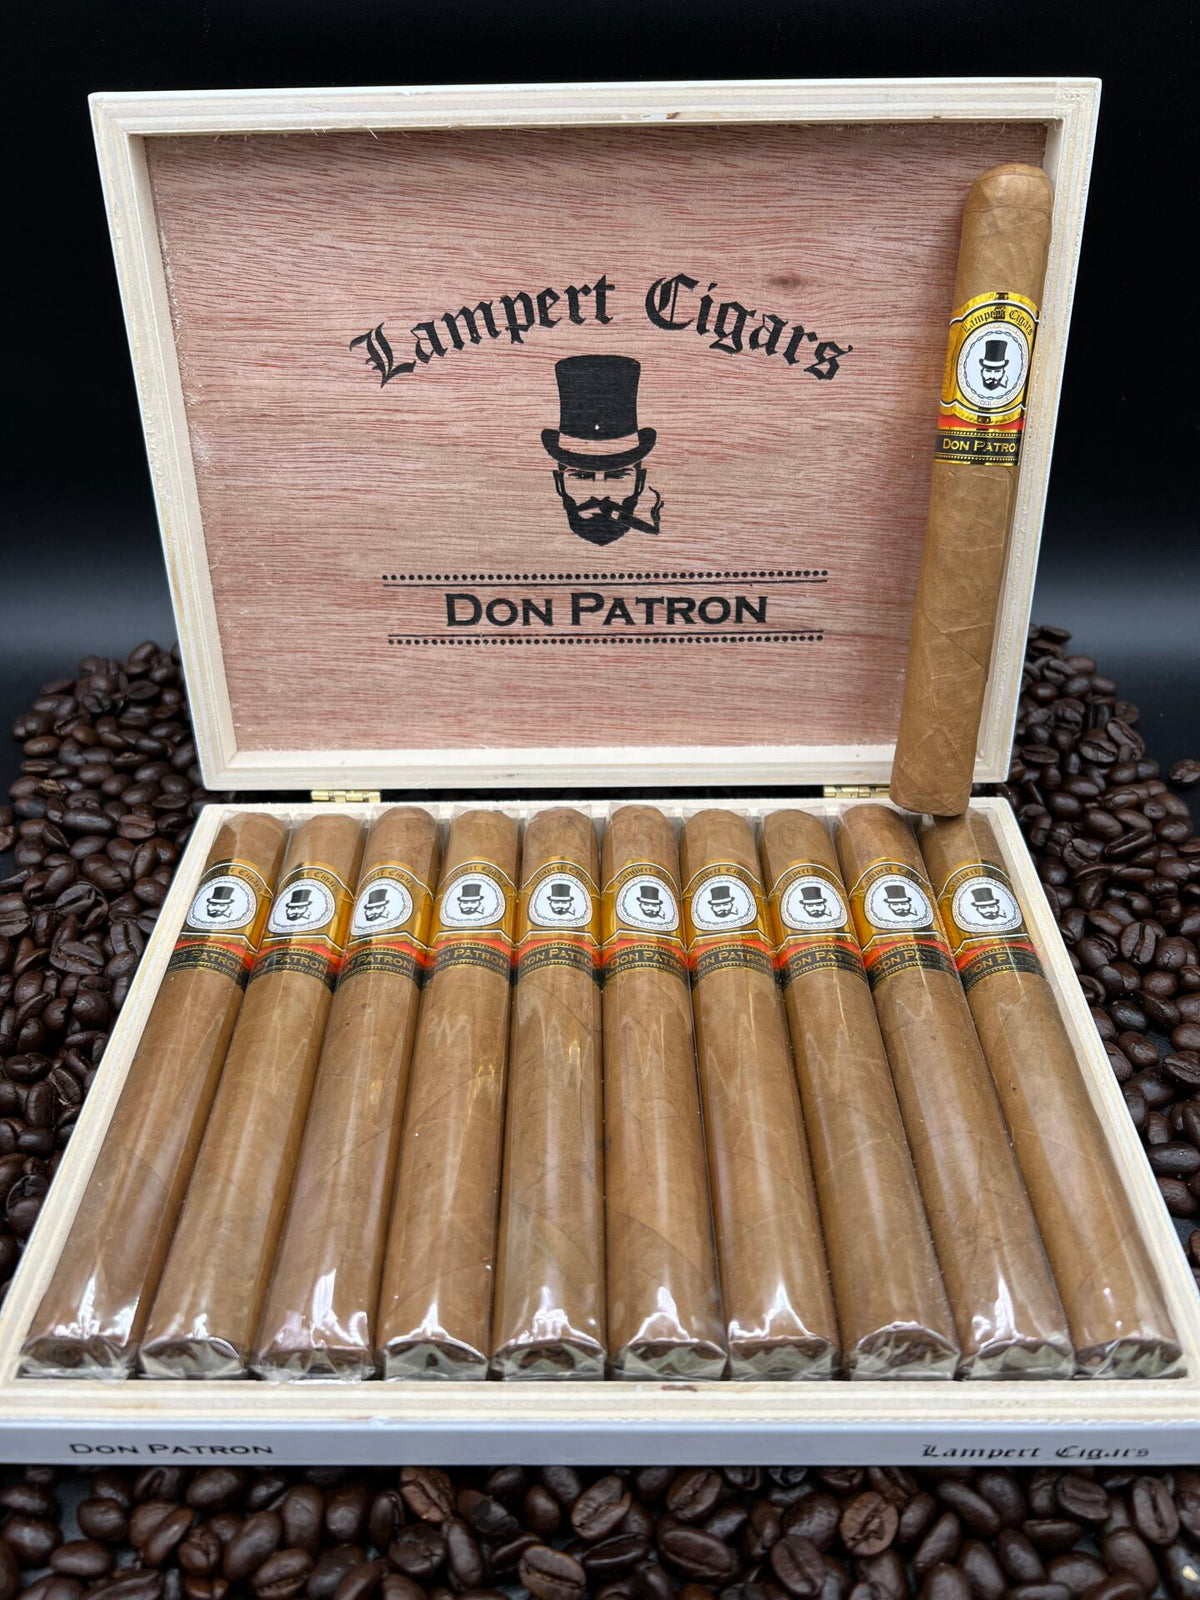 Lampert Cigars - Don Patron Toro cigars supplied by Sir Louis Cigars